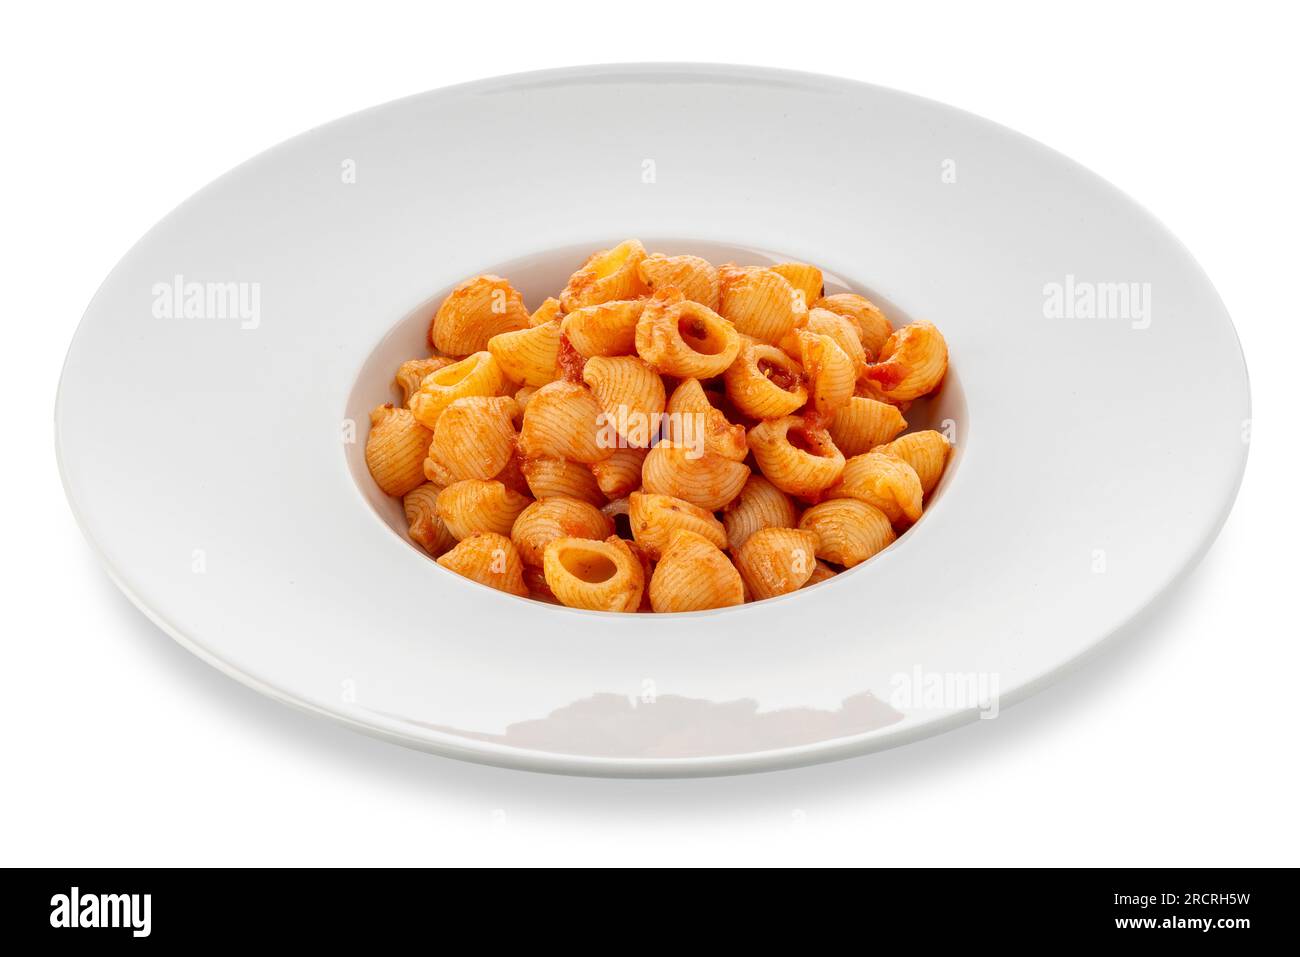 Macaroni pasta with red  tomato sauce in white dish, Italian pasta called pipette (little pipe), Isolated Stock Photo